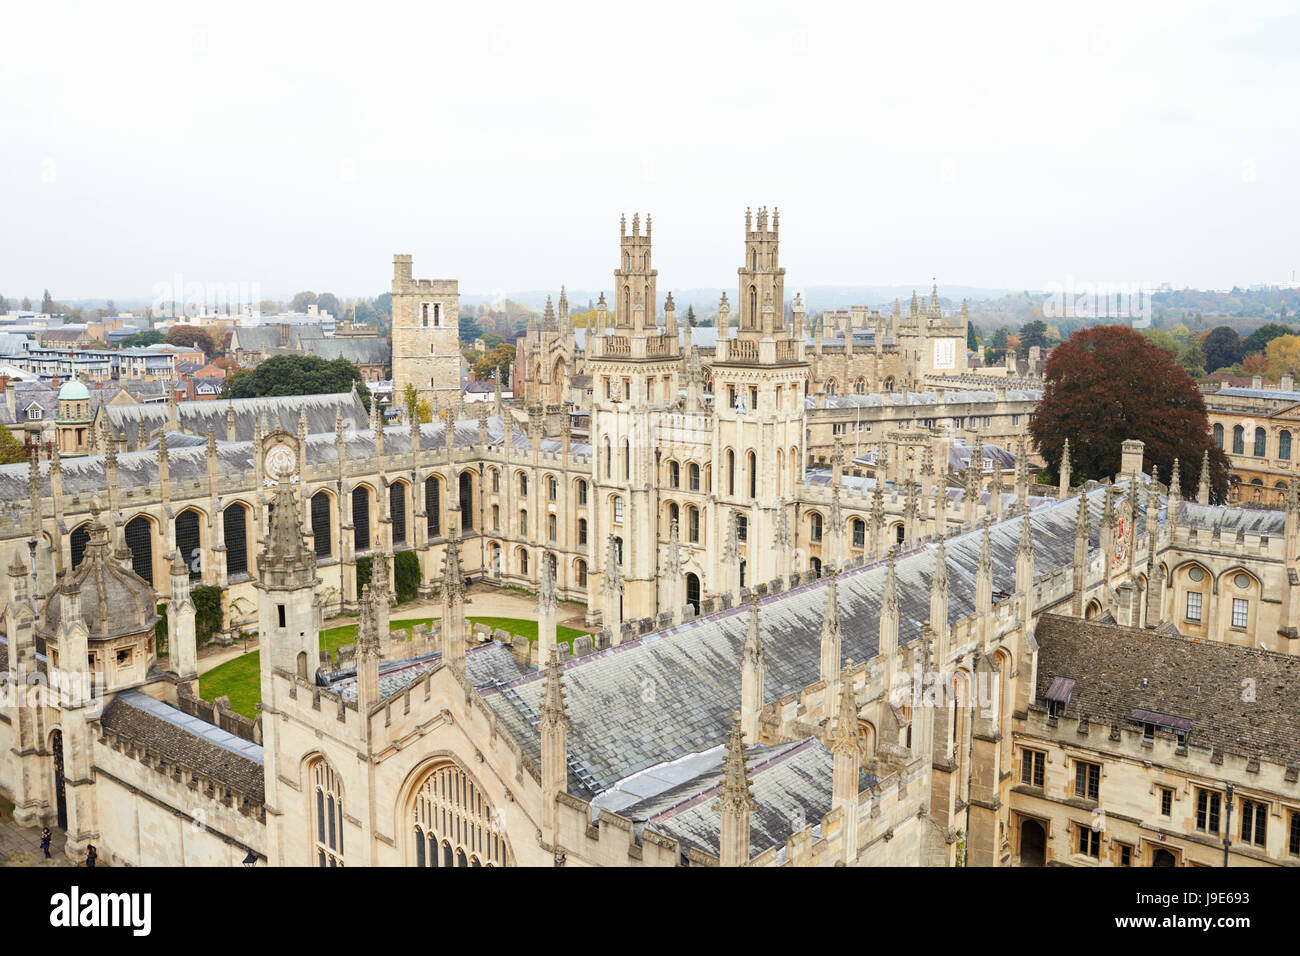 OXFORD/ UK- OCTOBER 26 2016: Aerial View Of Oxford City Showing College Buildings And Spires Stock Photo